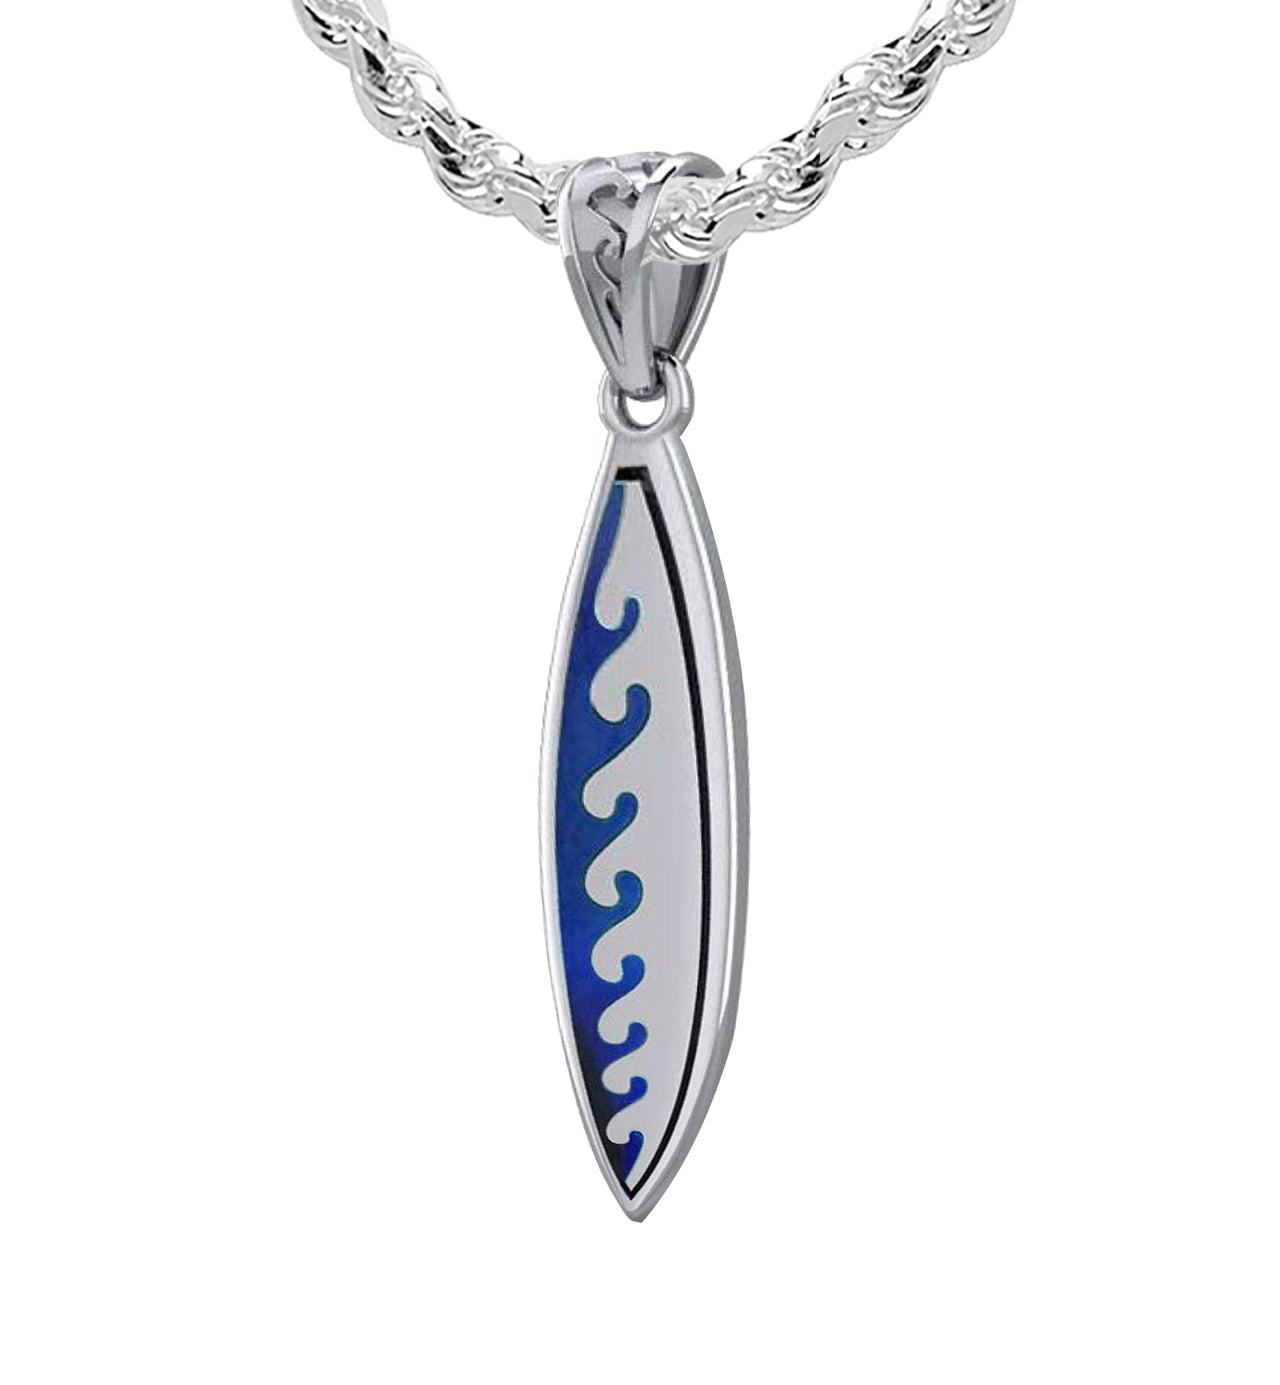 Men's Large Wide Heavy Solid 2in 925 Sterling Silver Wave Surfboard Pendant Necklace, 38mm